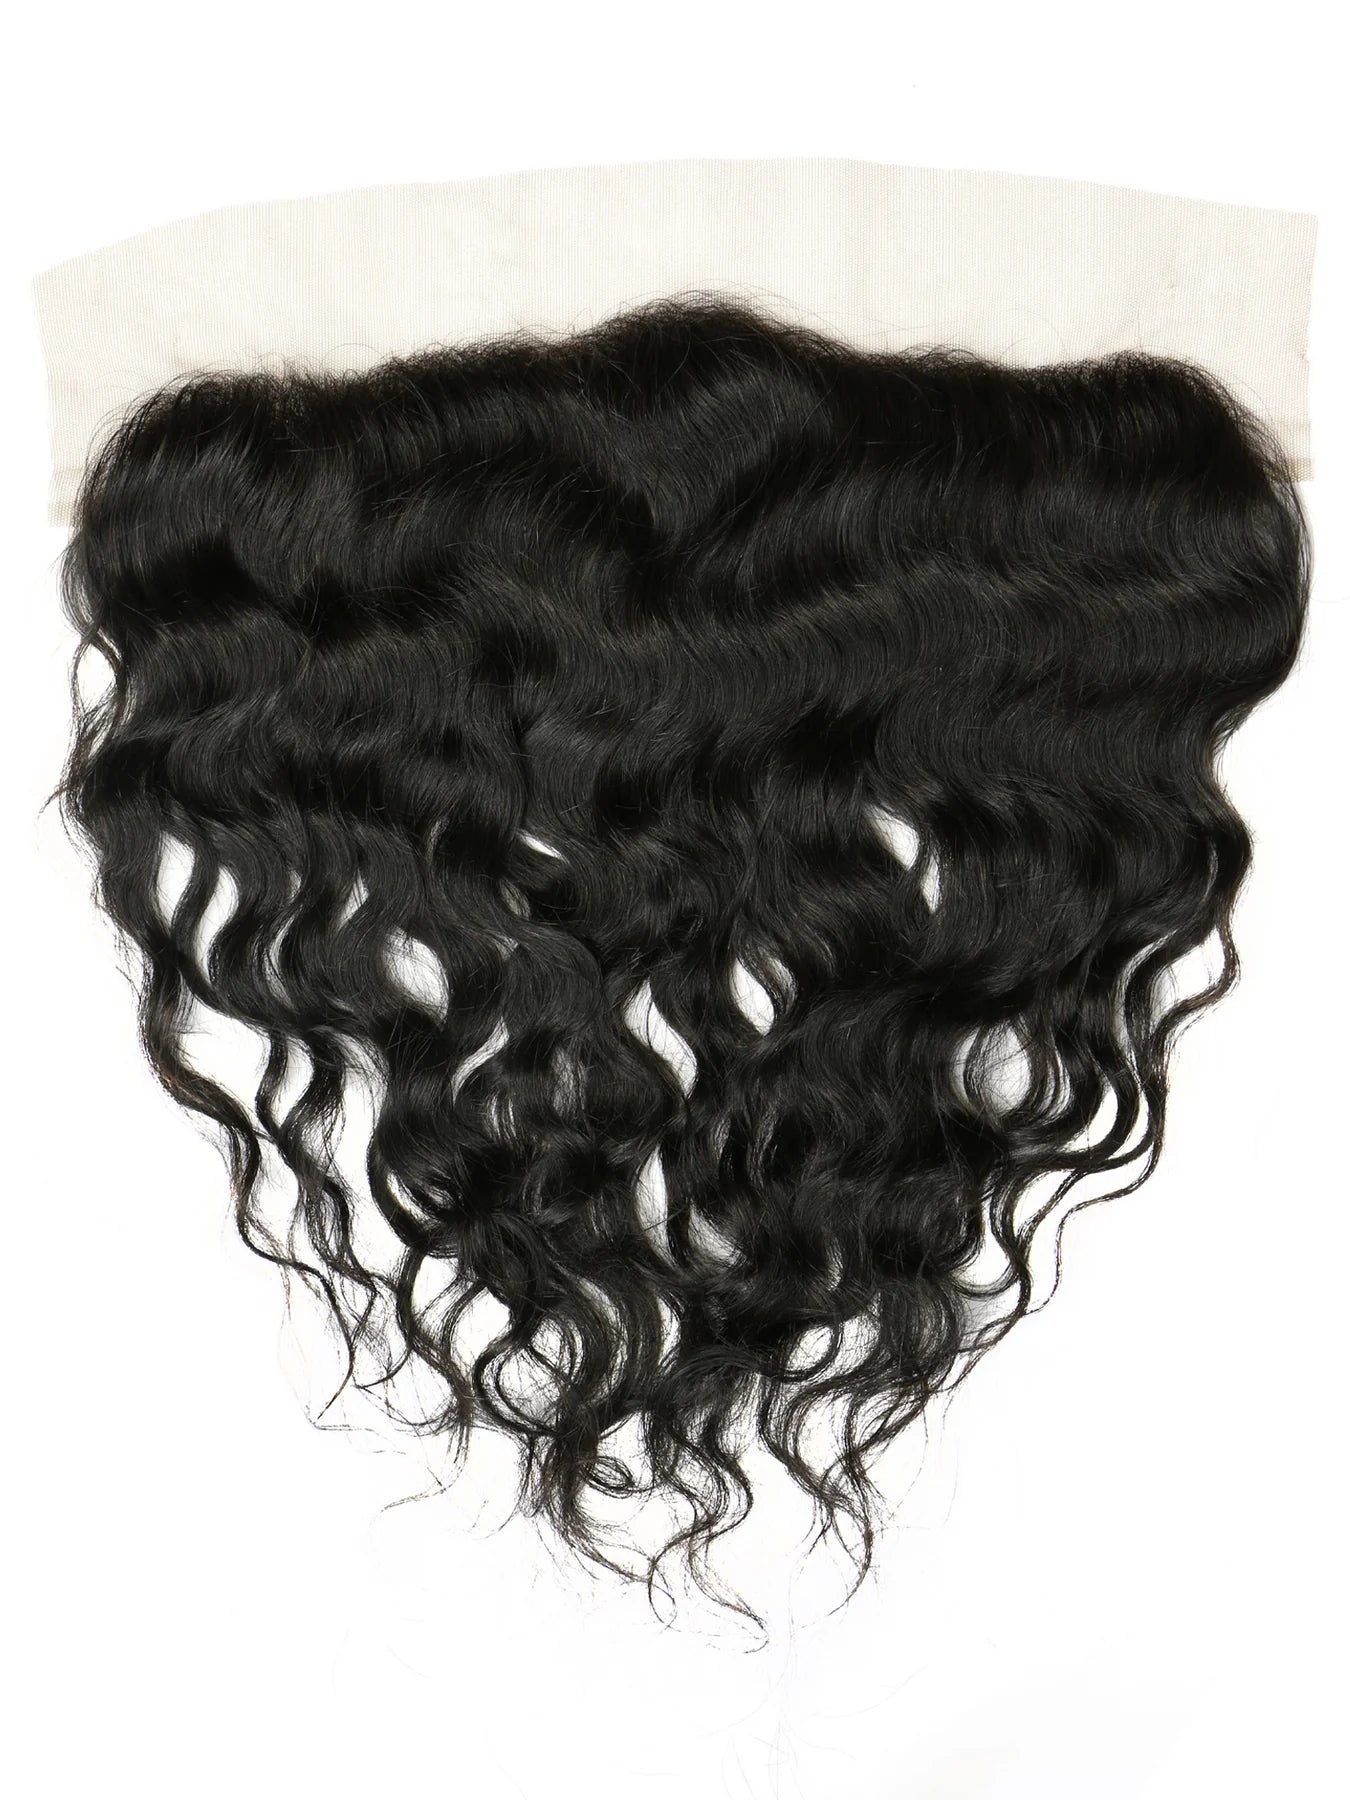 Lace Frontal/Closure Natural Wave - BB Collections Hair